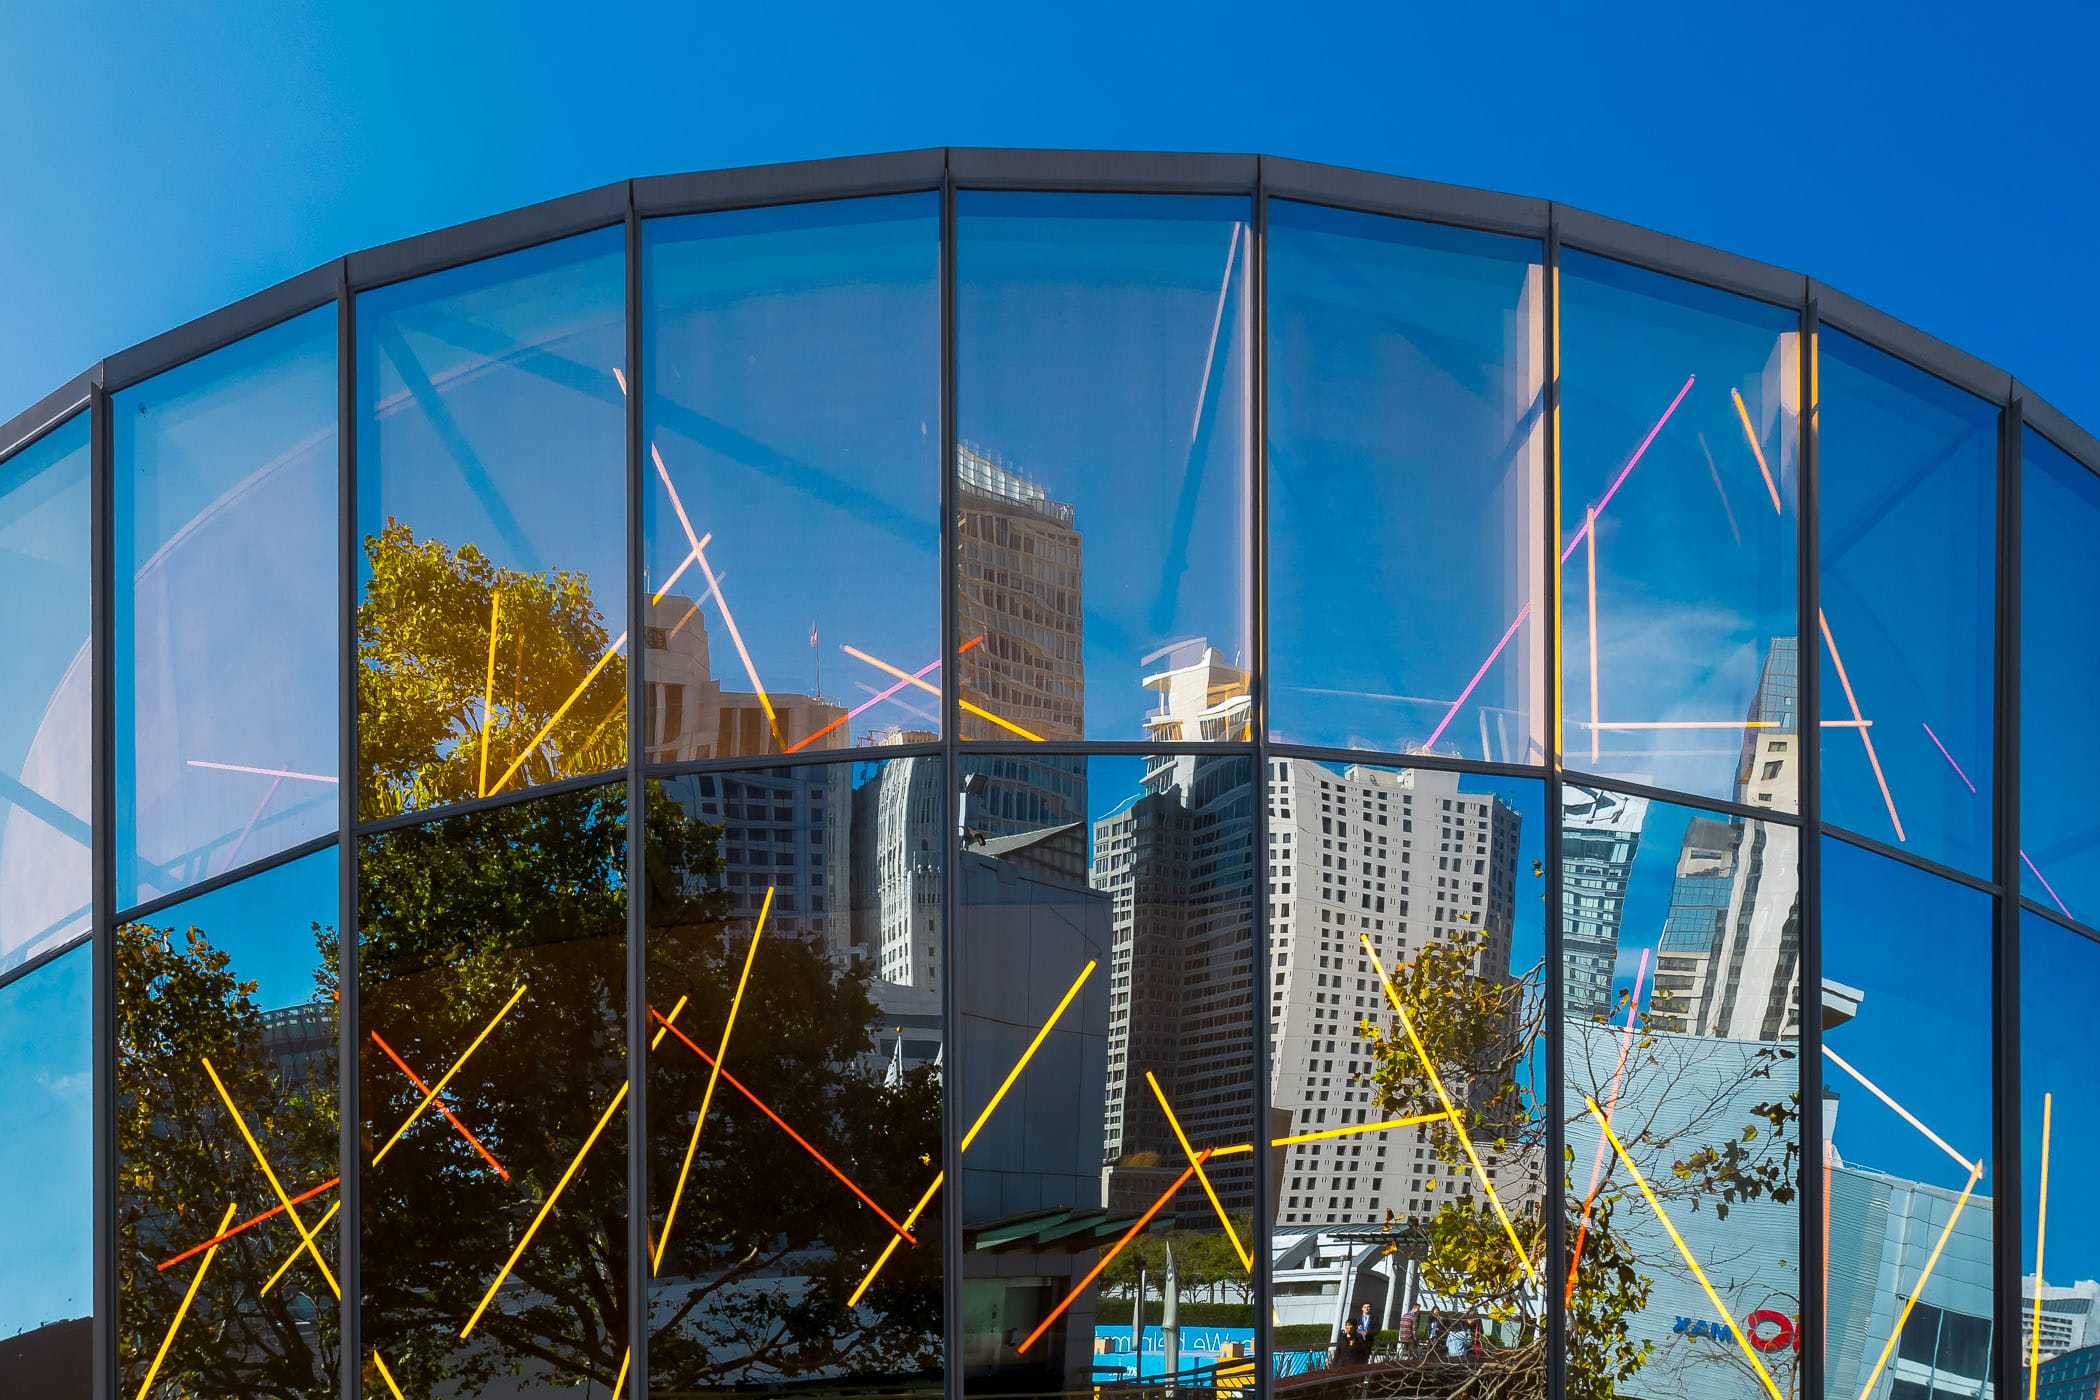 Skyscrapers are reflected in the glass façade of San Francisco's Children's Creativity Museum.